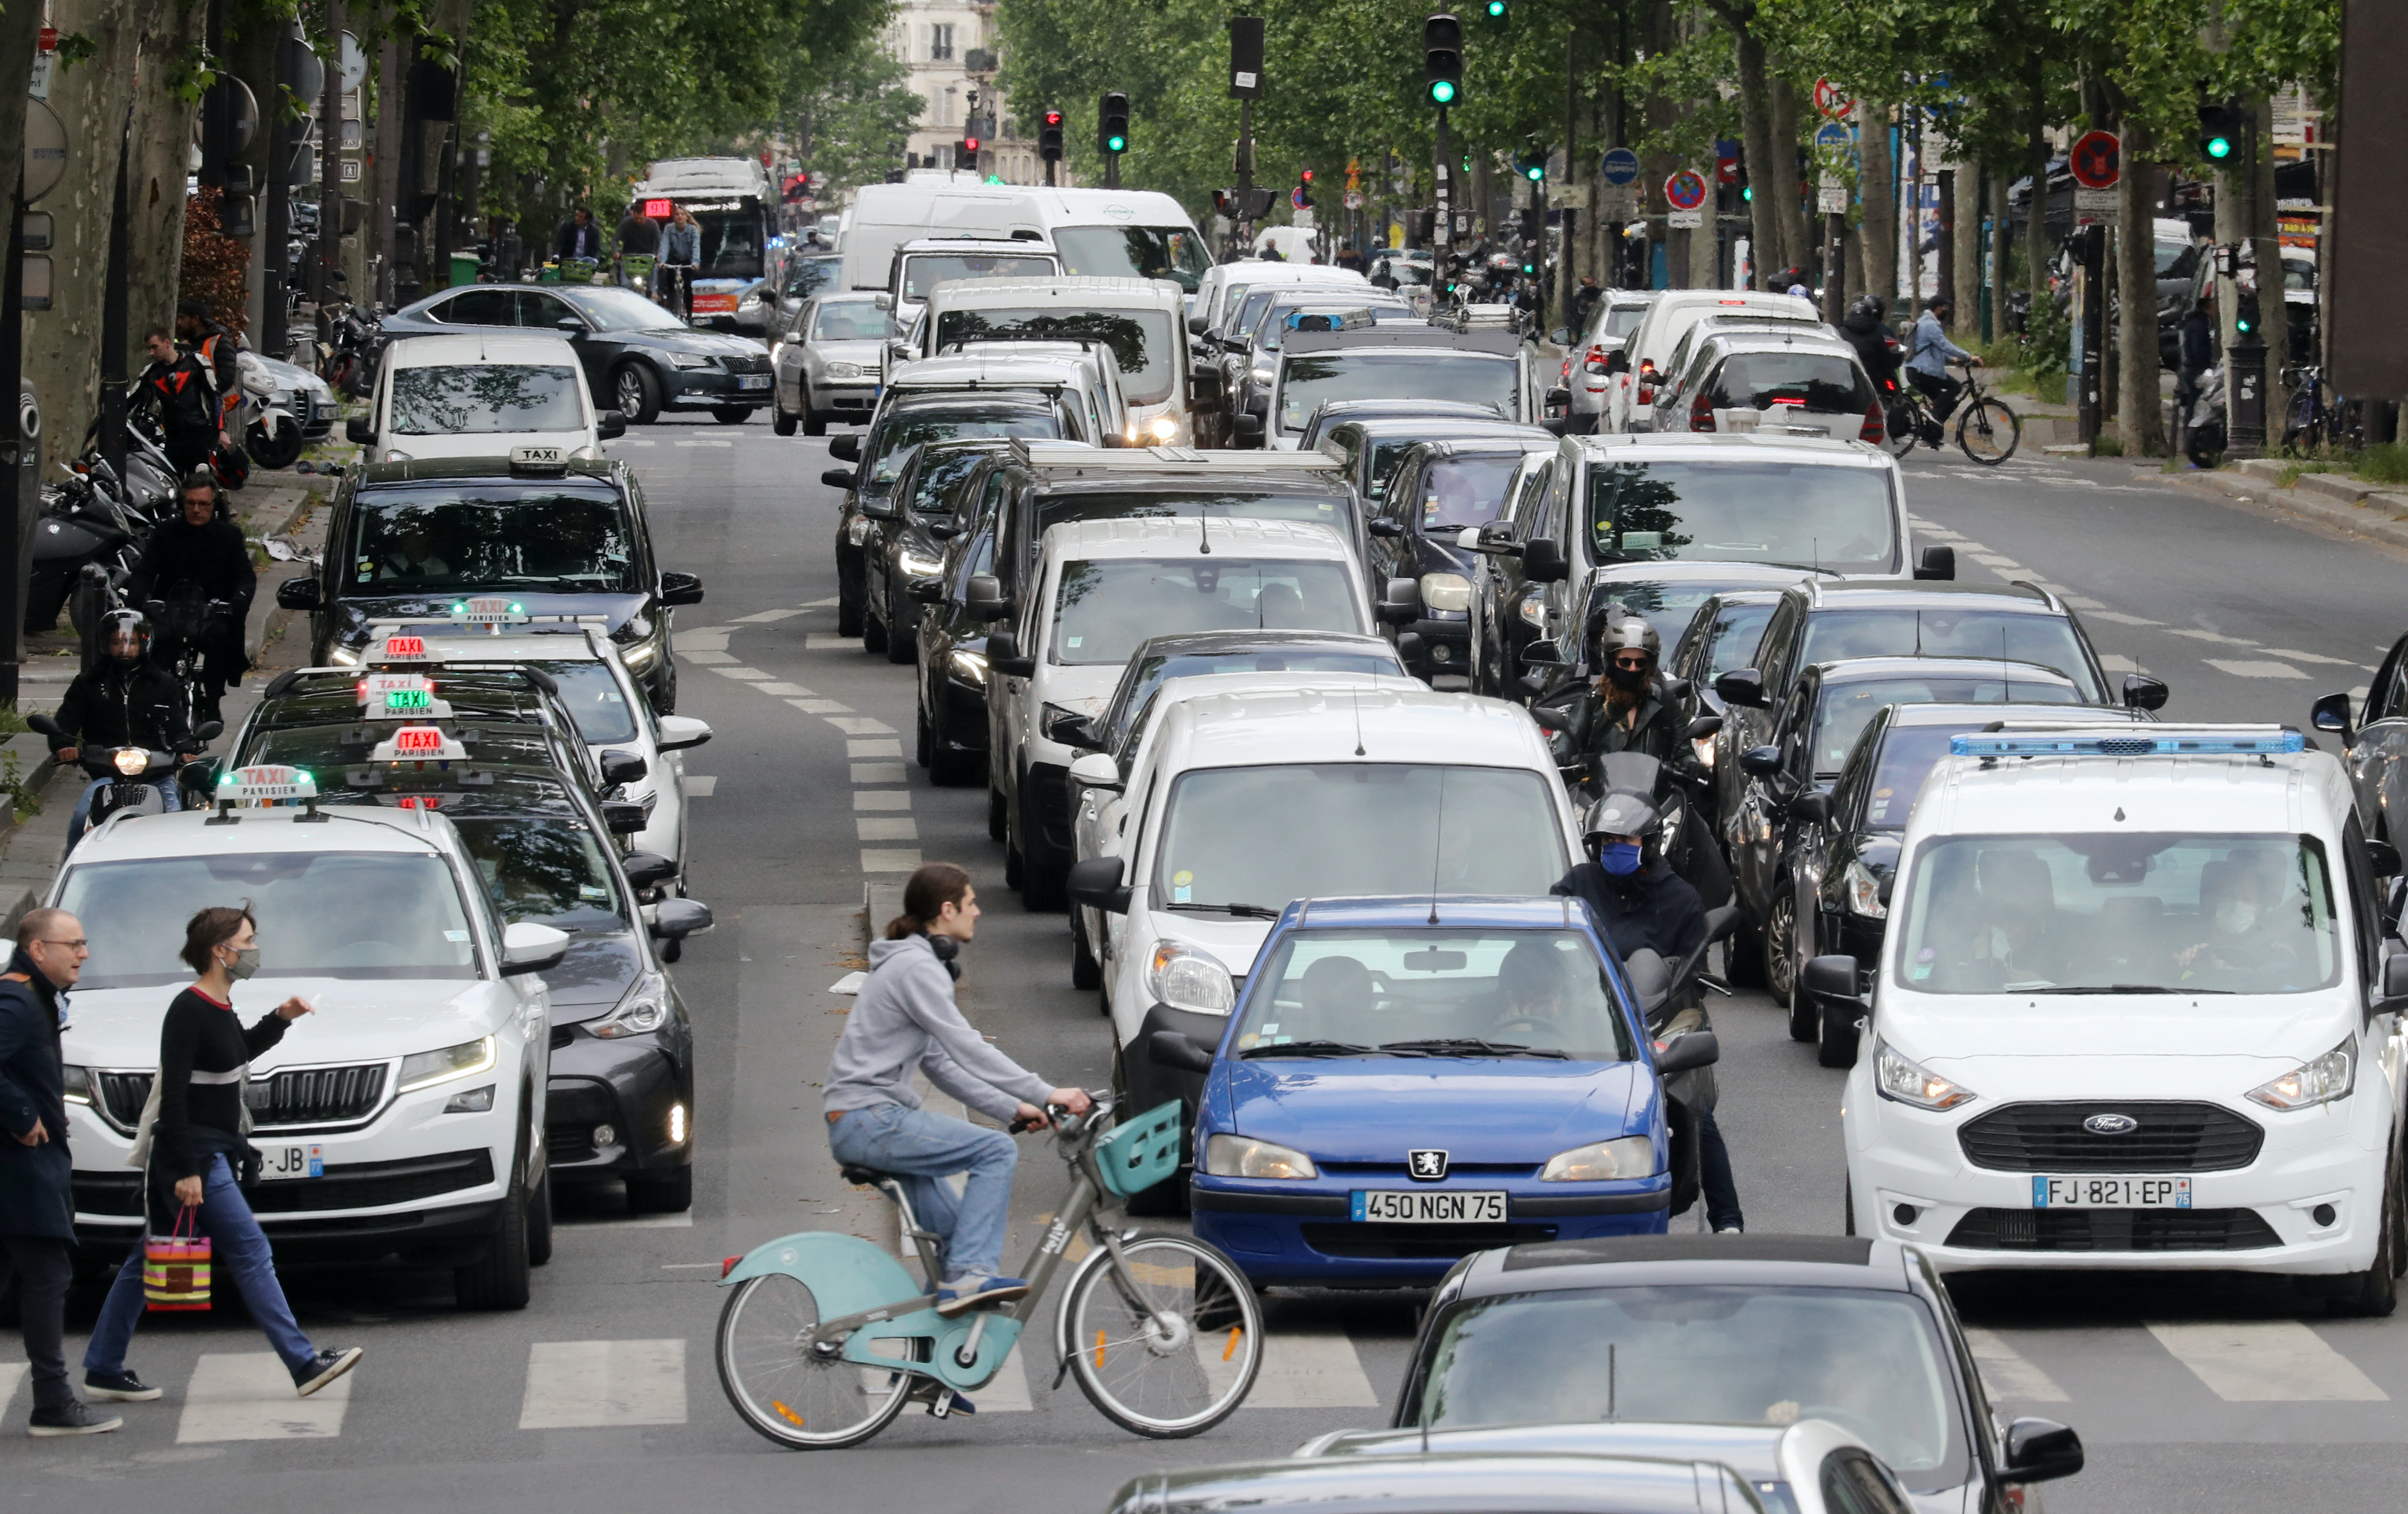 Paris wants to reduce inner-city car traffic drastically